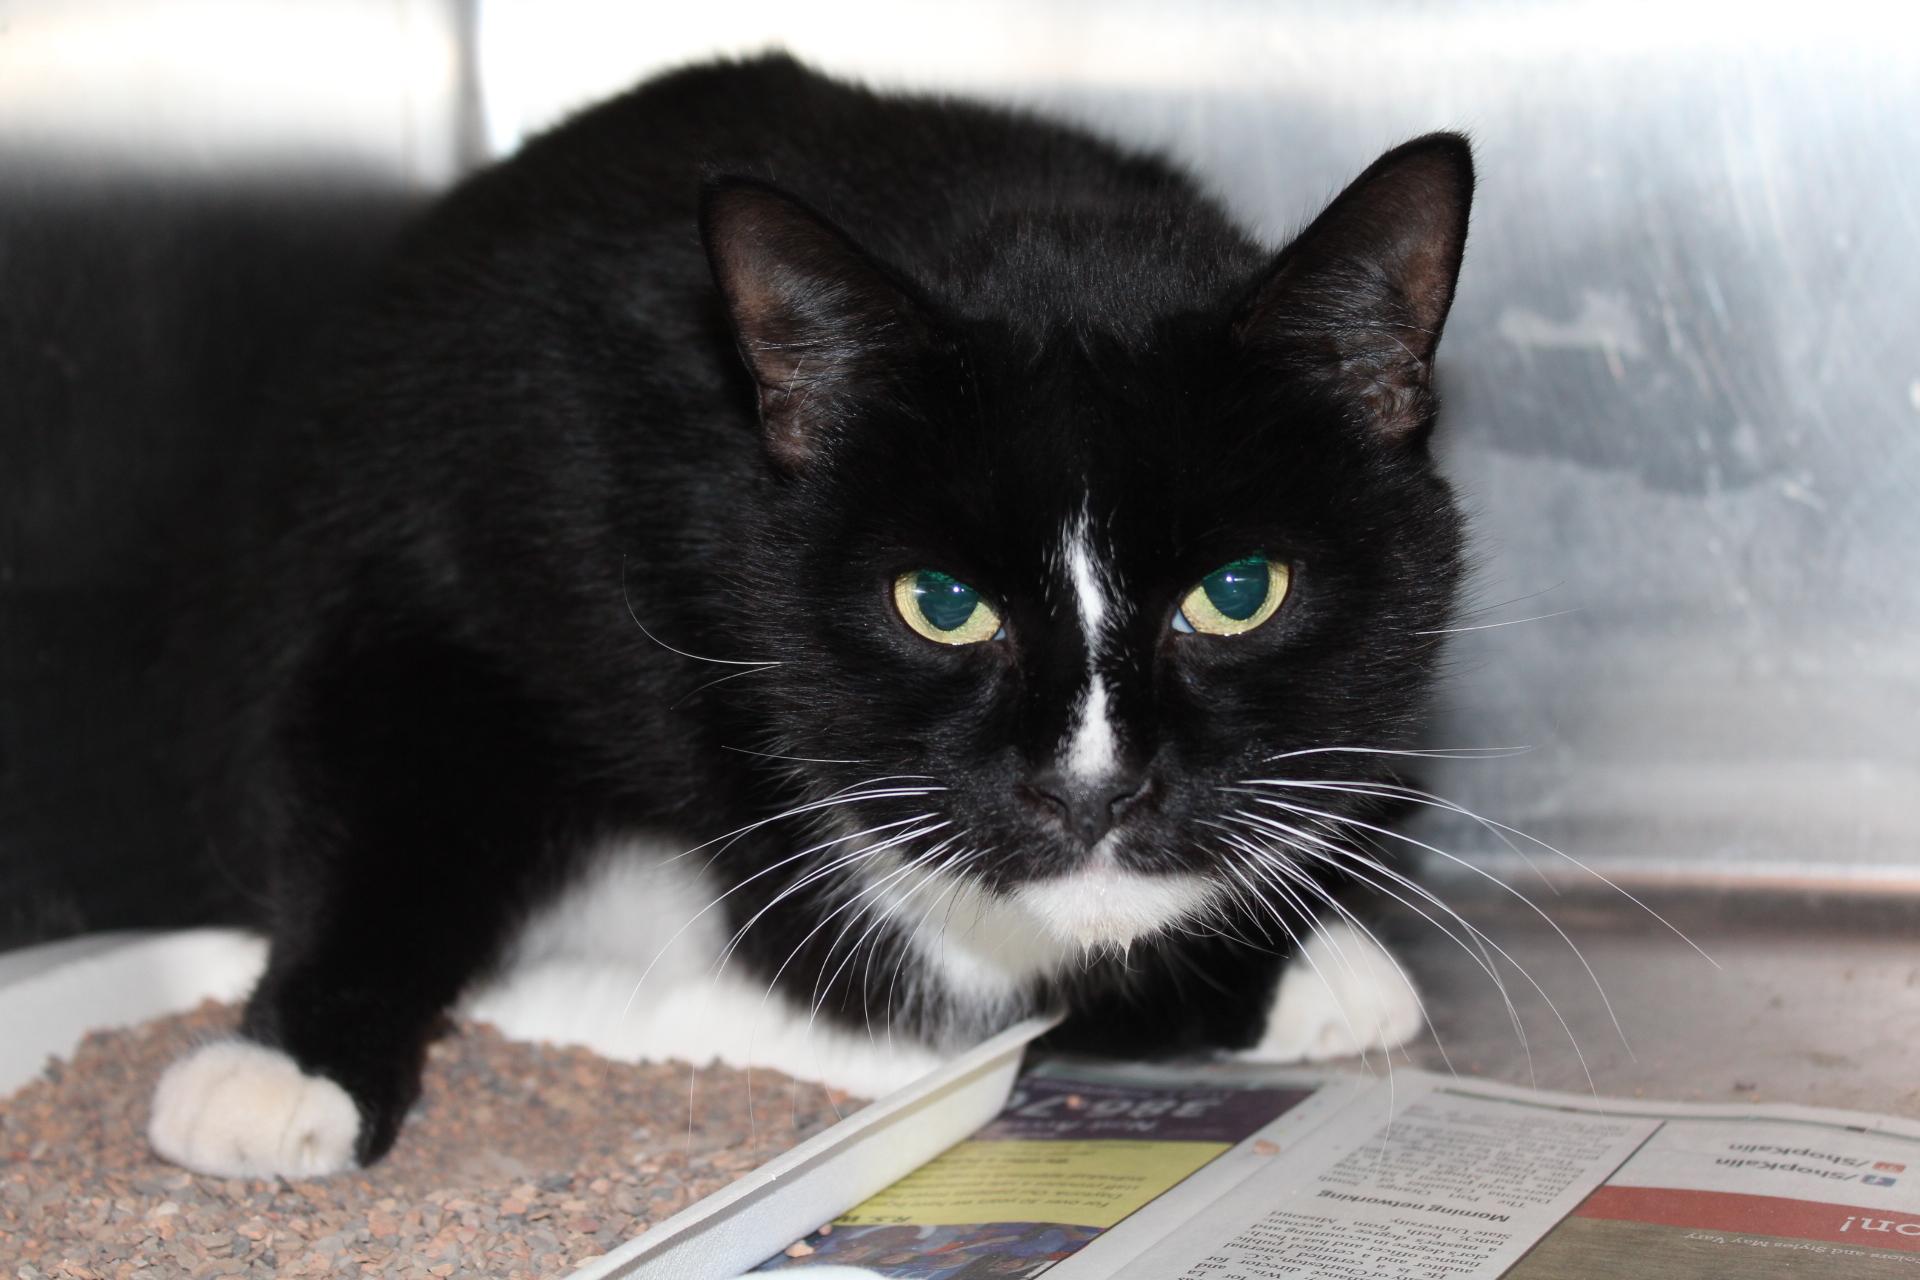 This is the third time Howard has been in the Observer, and he is still waiting for a home. Courtesy photo